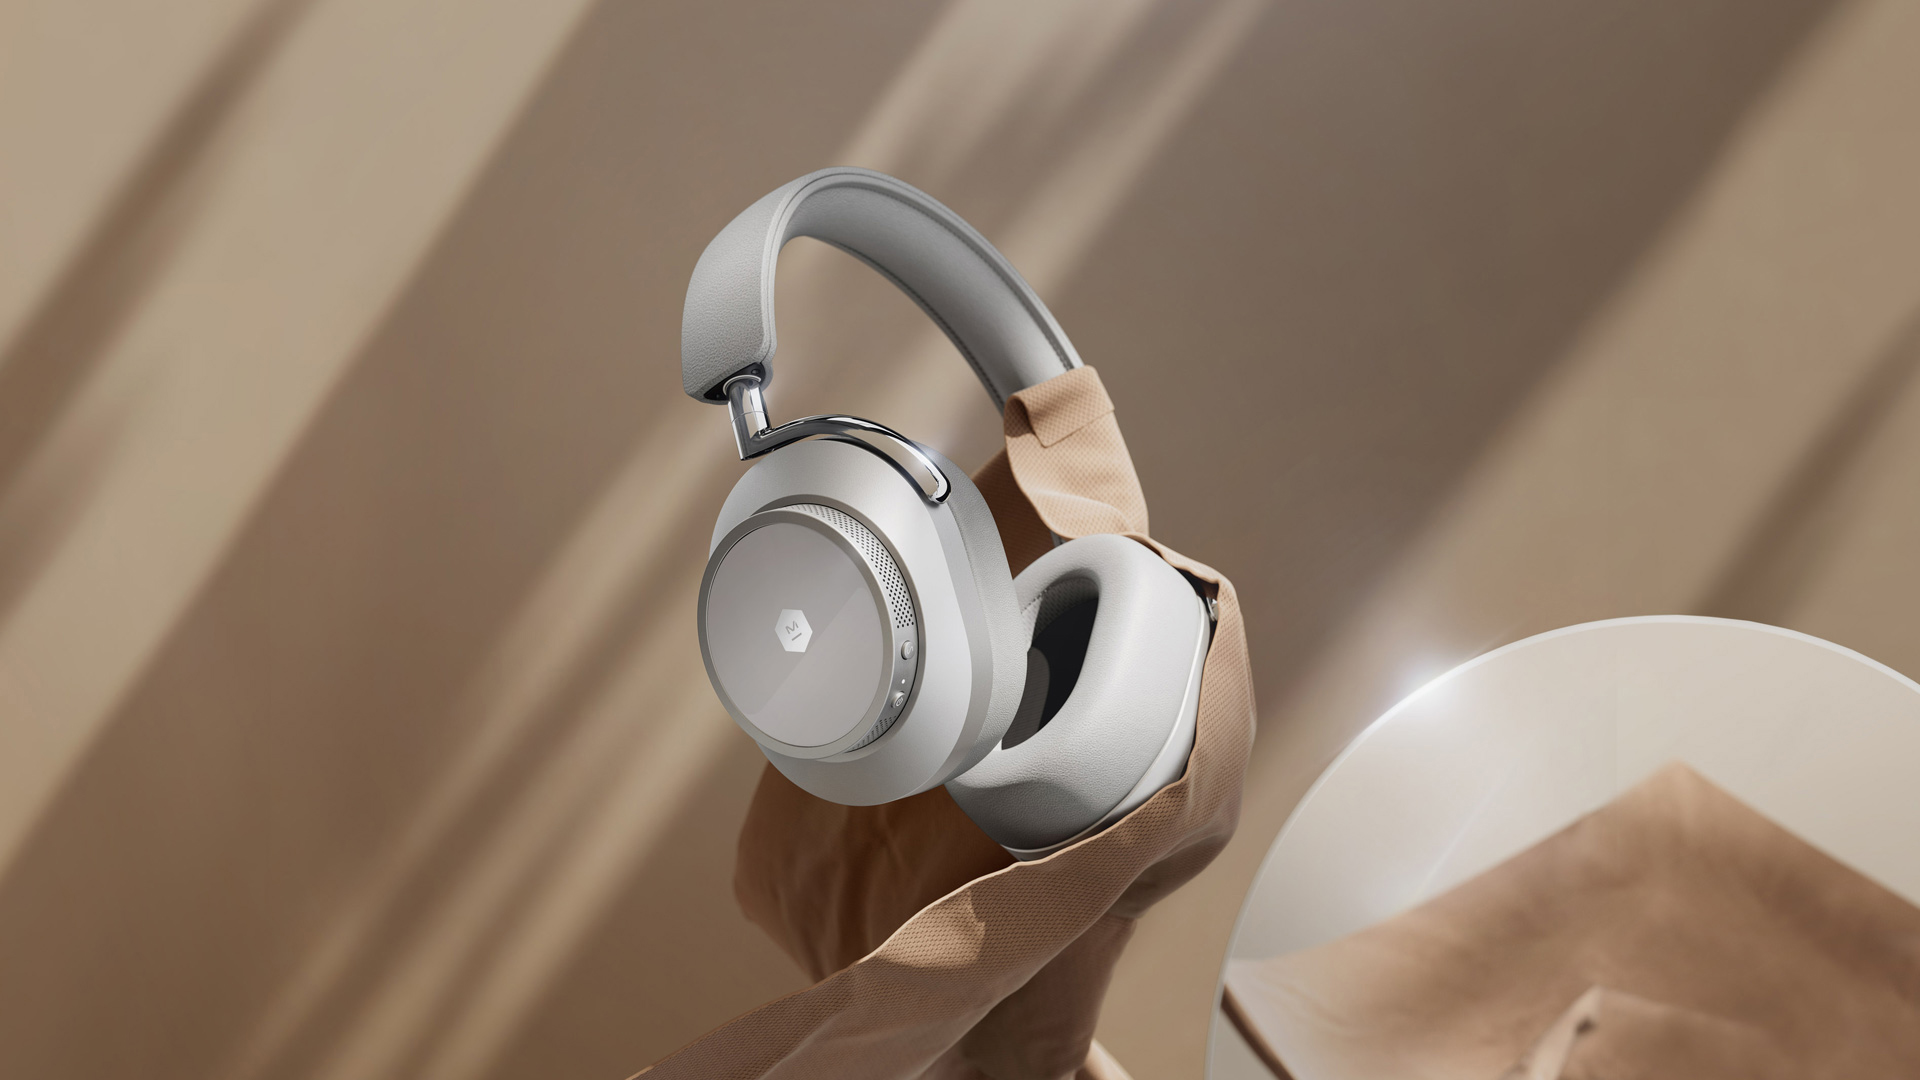 Know Your Sound Tool: MW75 Active Noise-Cancelling Wireless Headphones